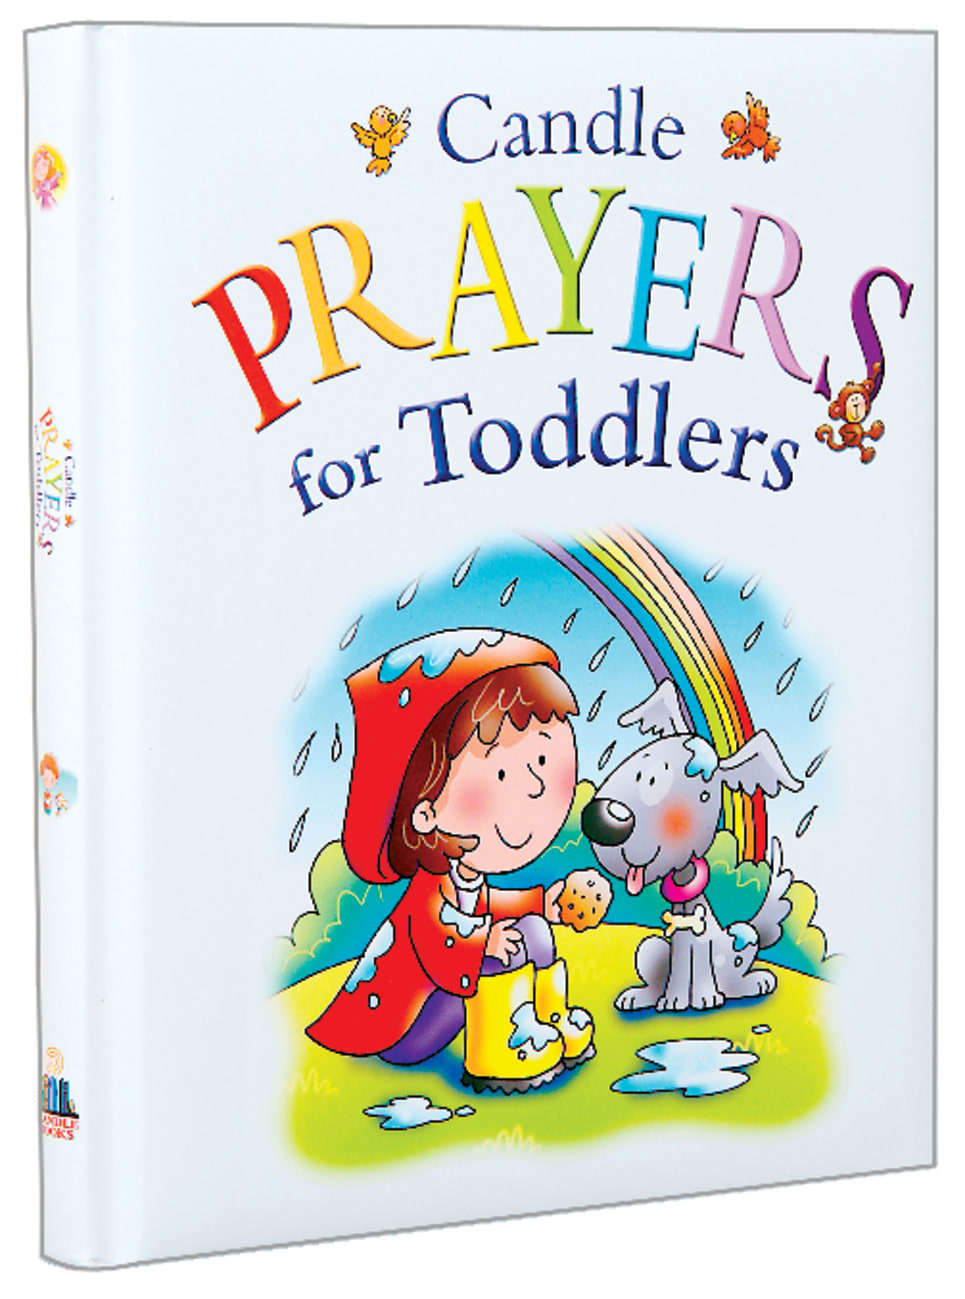 Candle Prayers For Toddlers (Candle Bible For Toddlers Series) Hardback